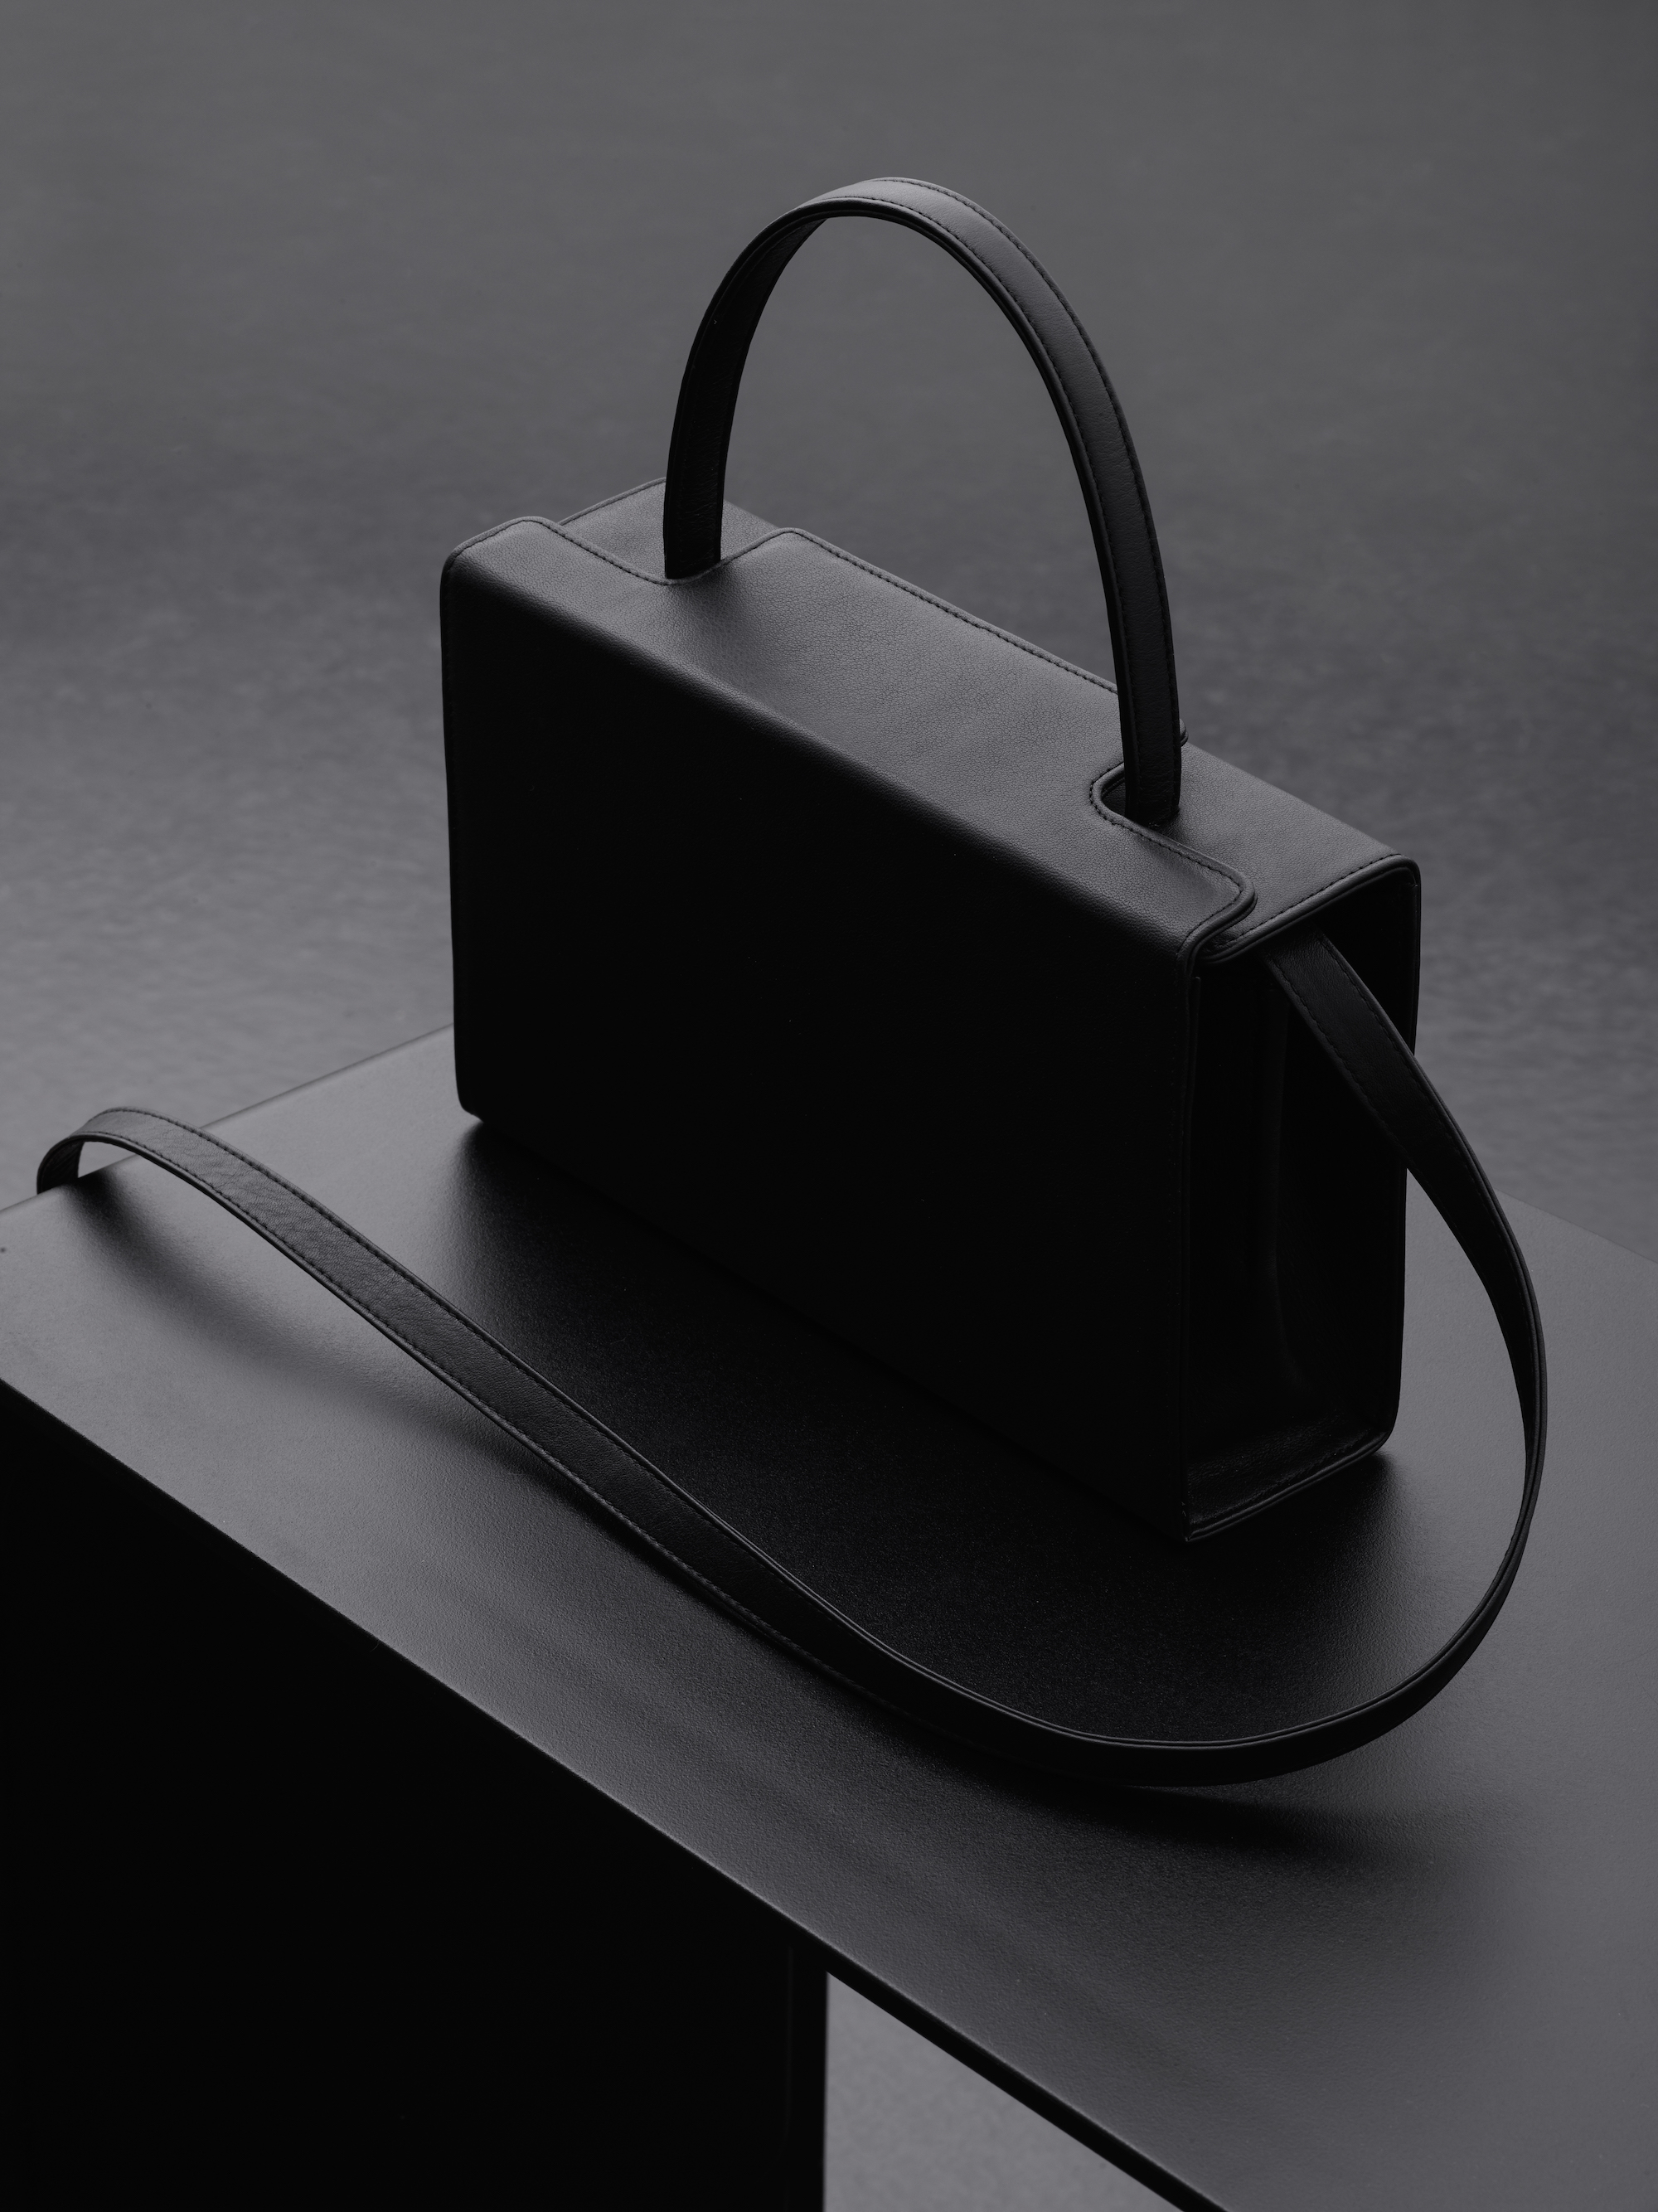 The Handbag Dieter Rams Designed For His Wife In The ’60s Is Now In ...